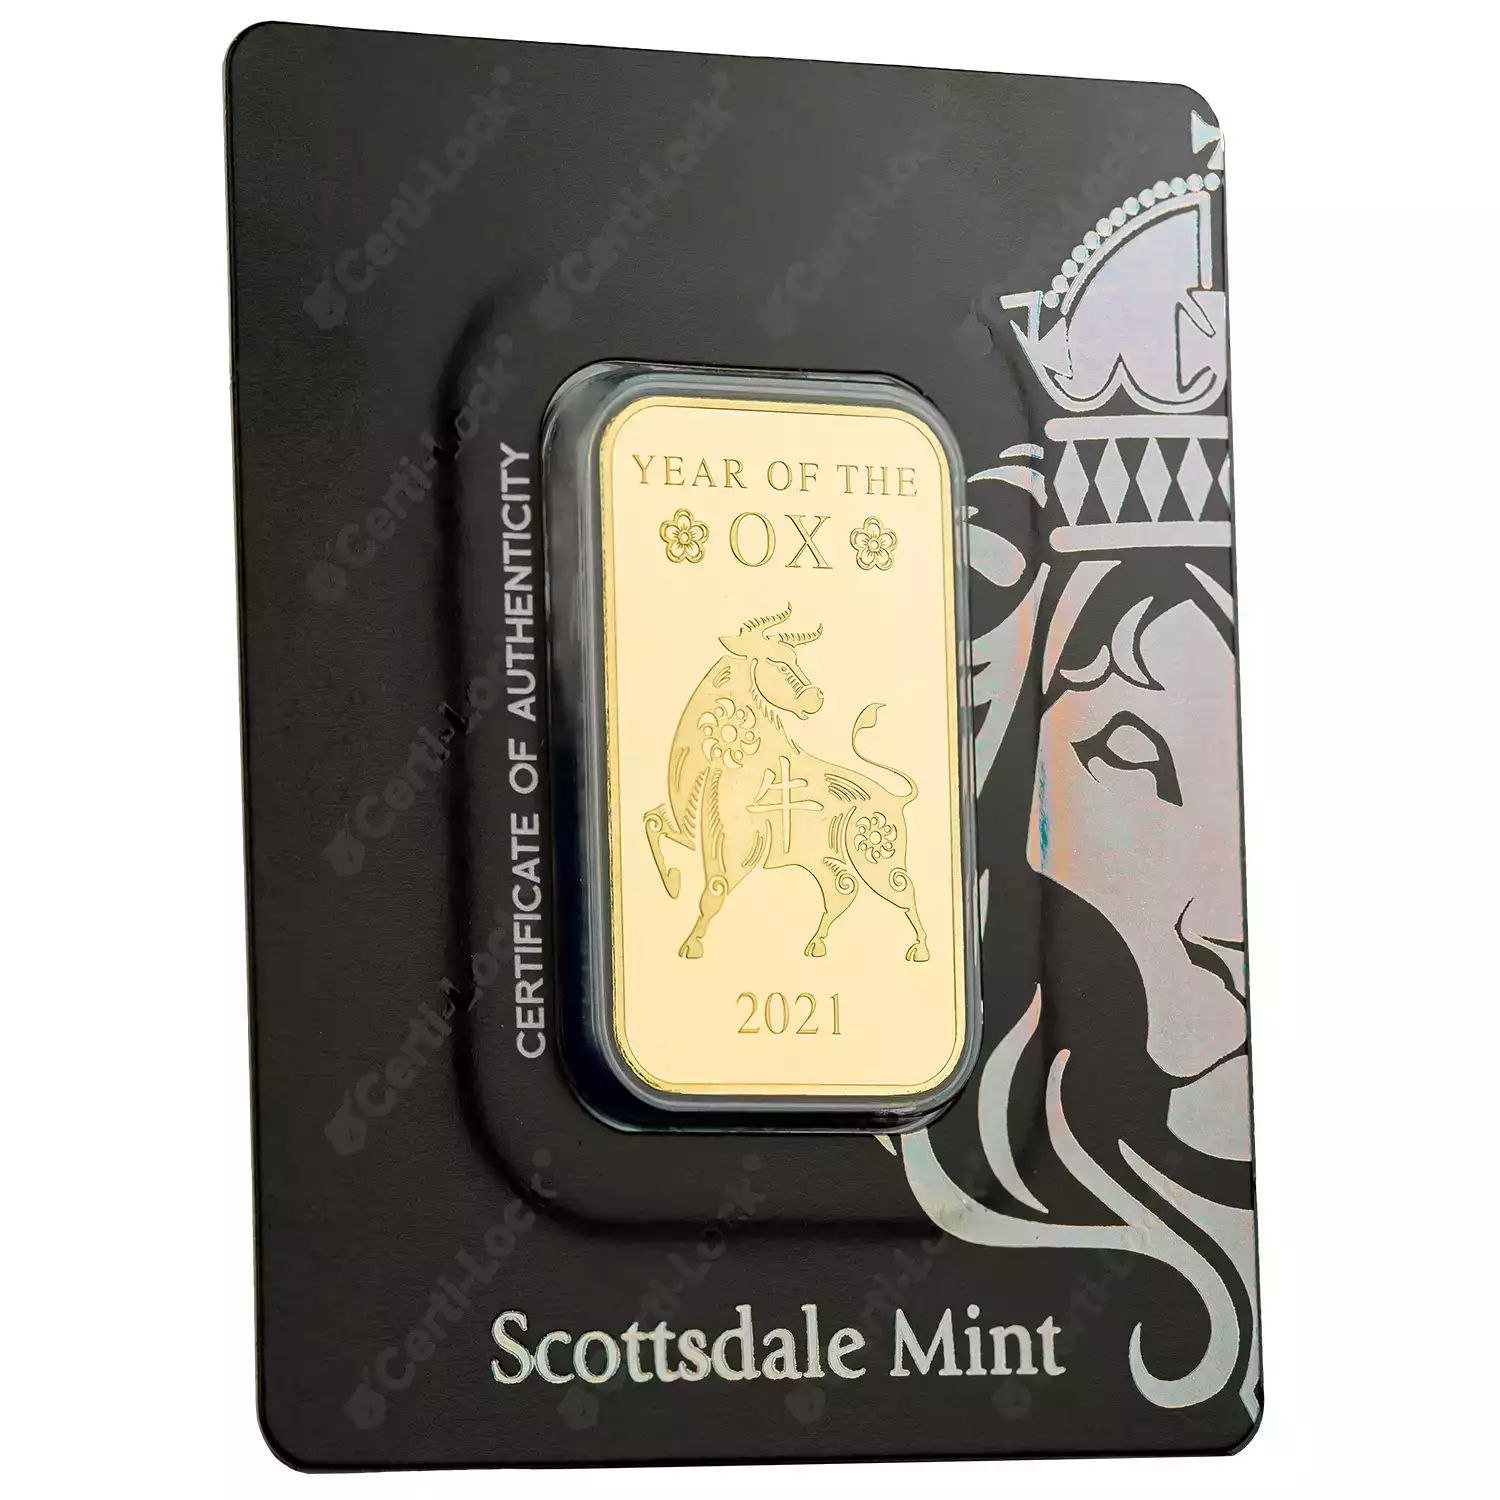 Scottsdale Mint 1oz Gold Year of the Ox Bar in CertiLock